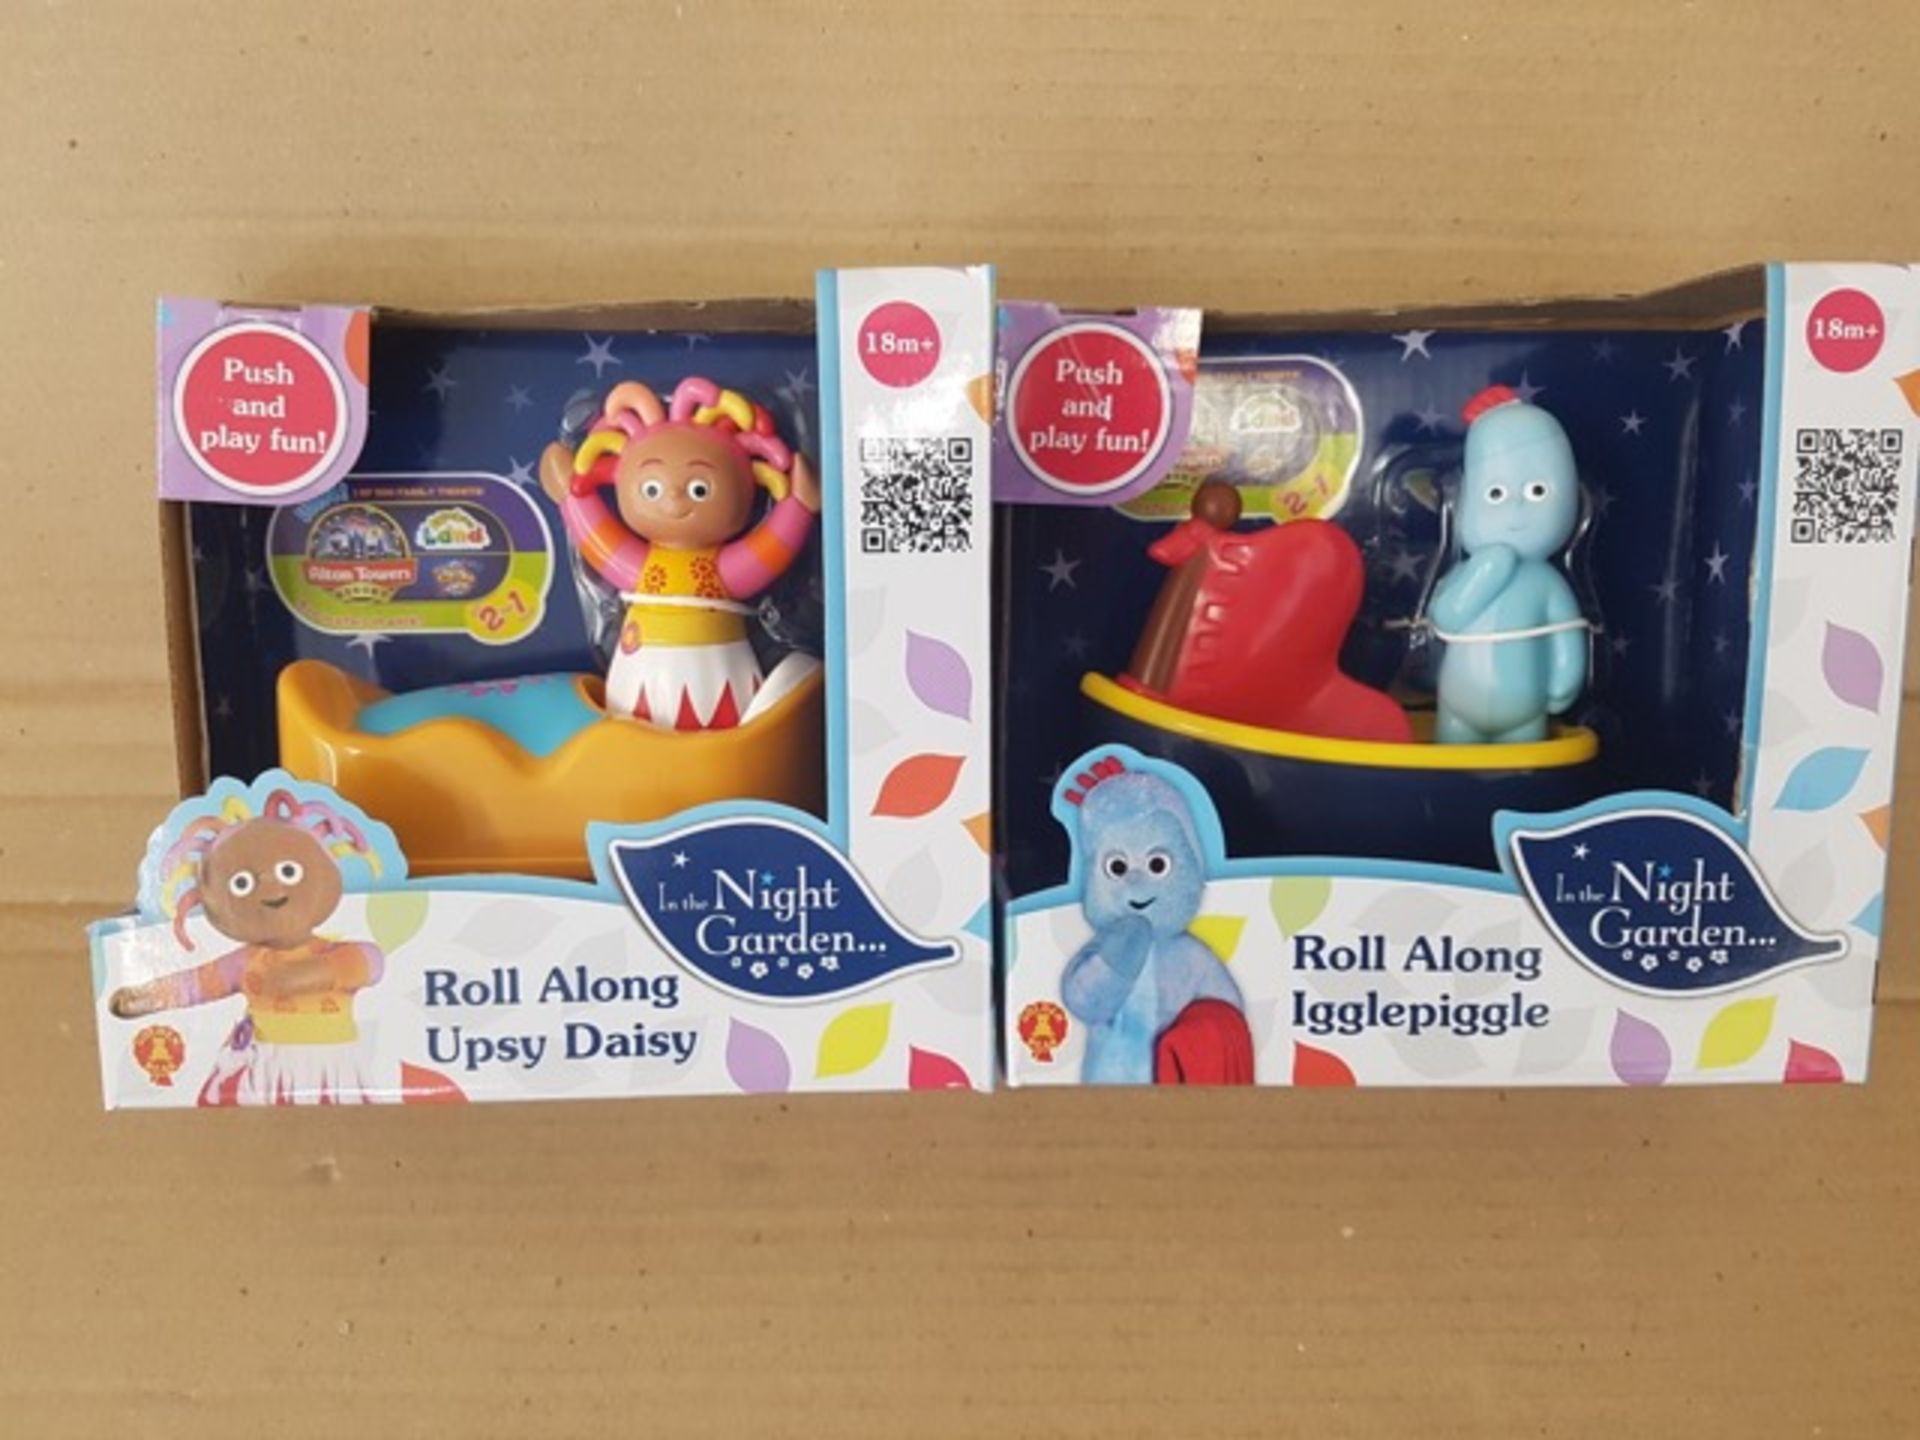 36 x Brand New In the Night Garden Roll Along Characters including: Upsy Daisy & Igglepiggle.